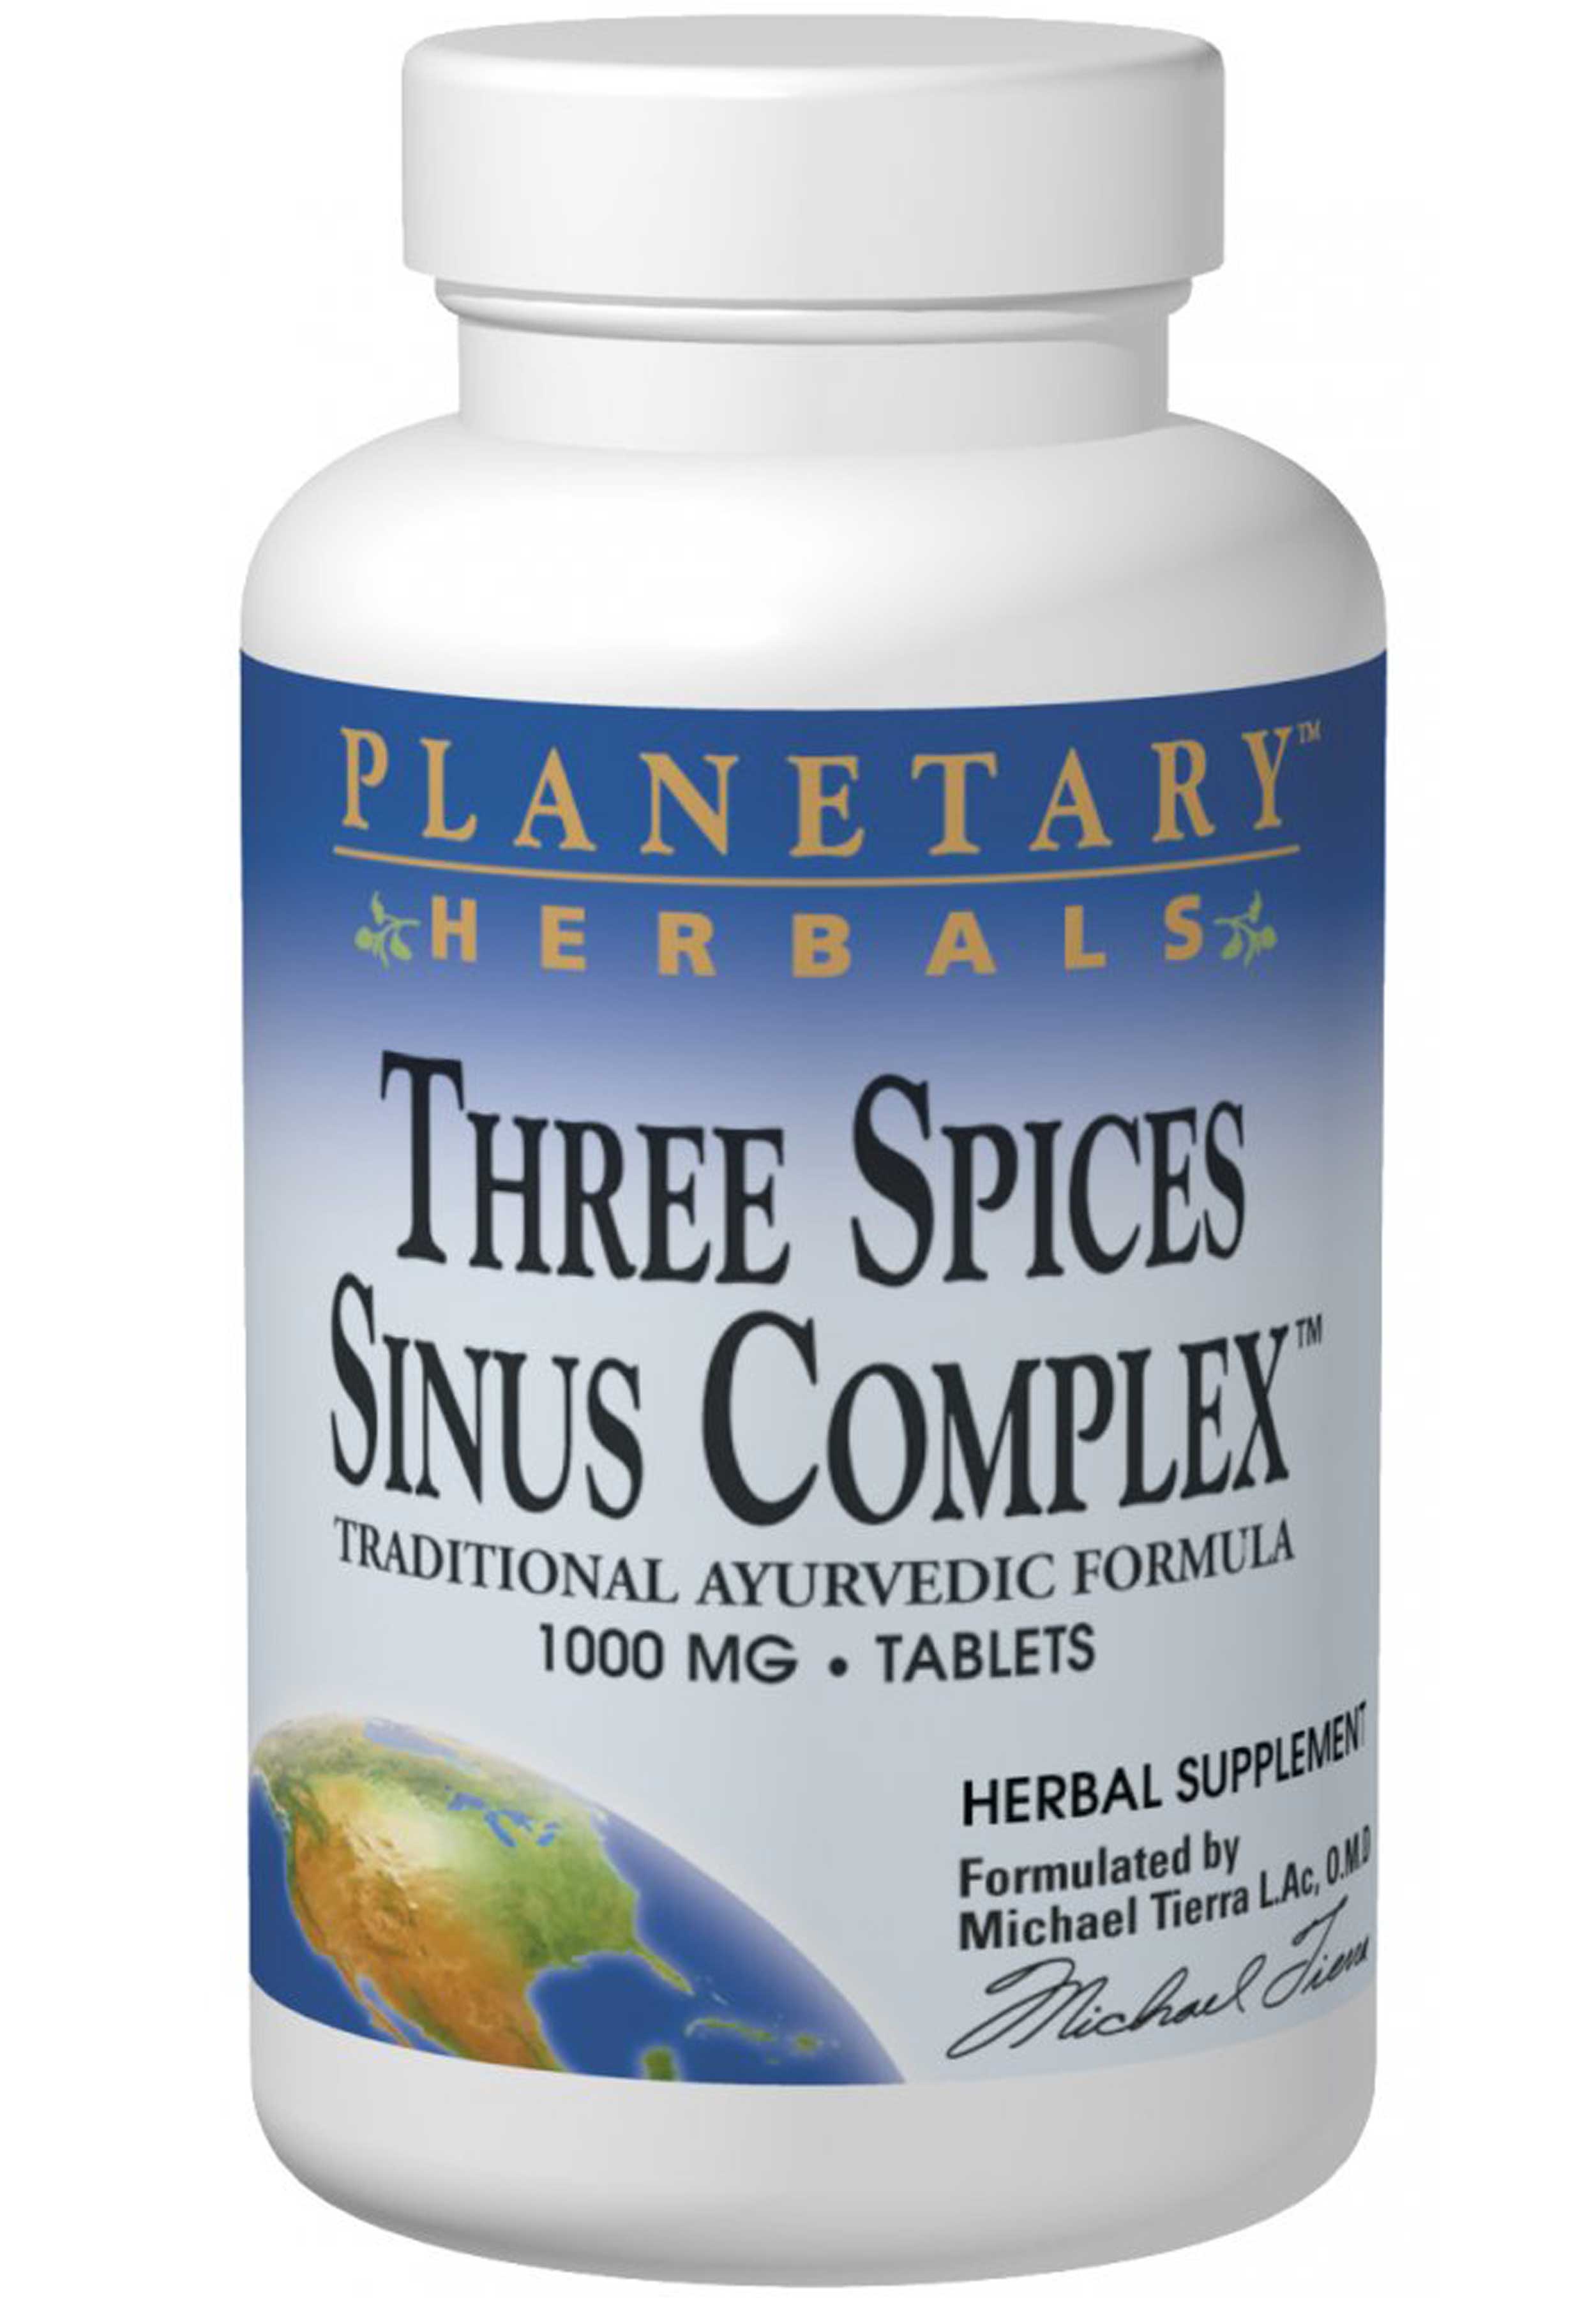 Planetary Herbals Three Spices Sinus Complex™